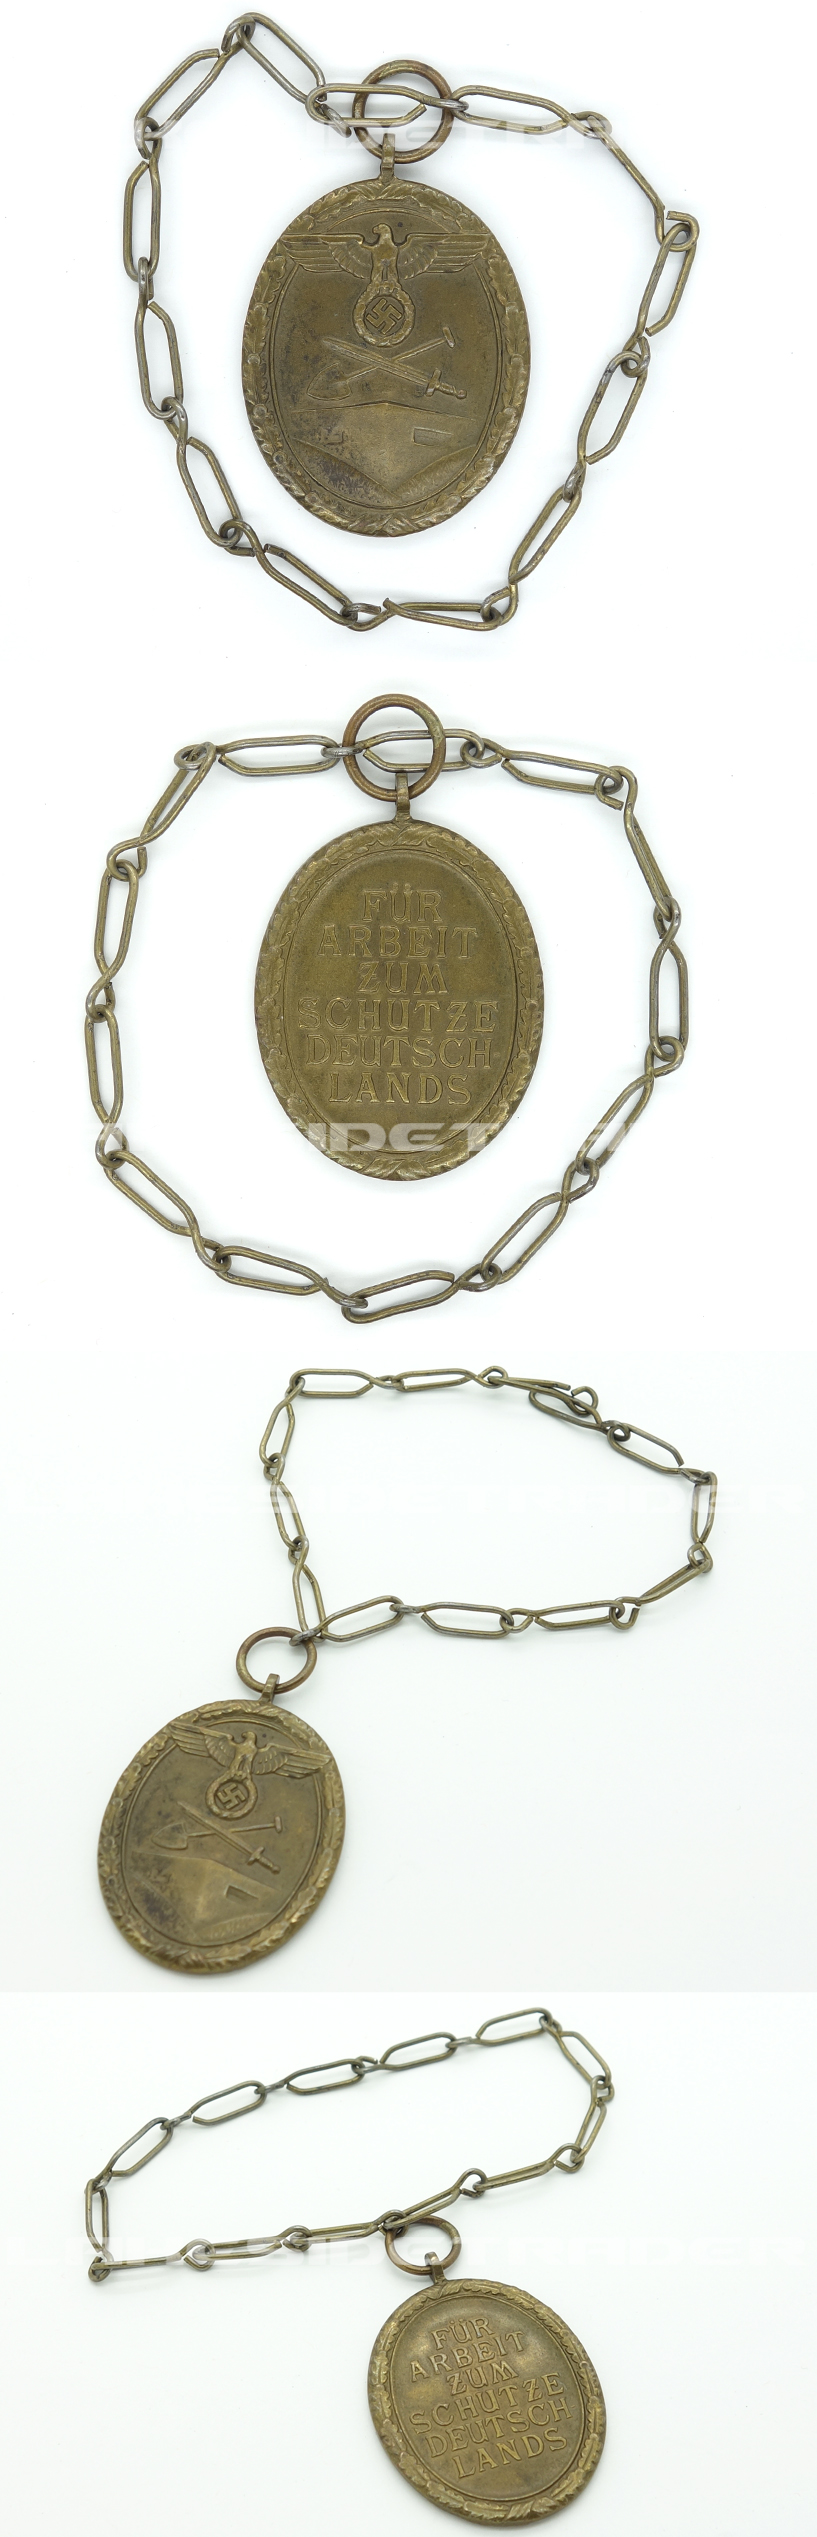 West Wall Medal on Chain